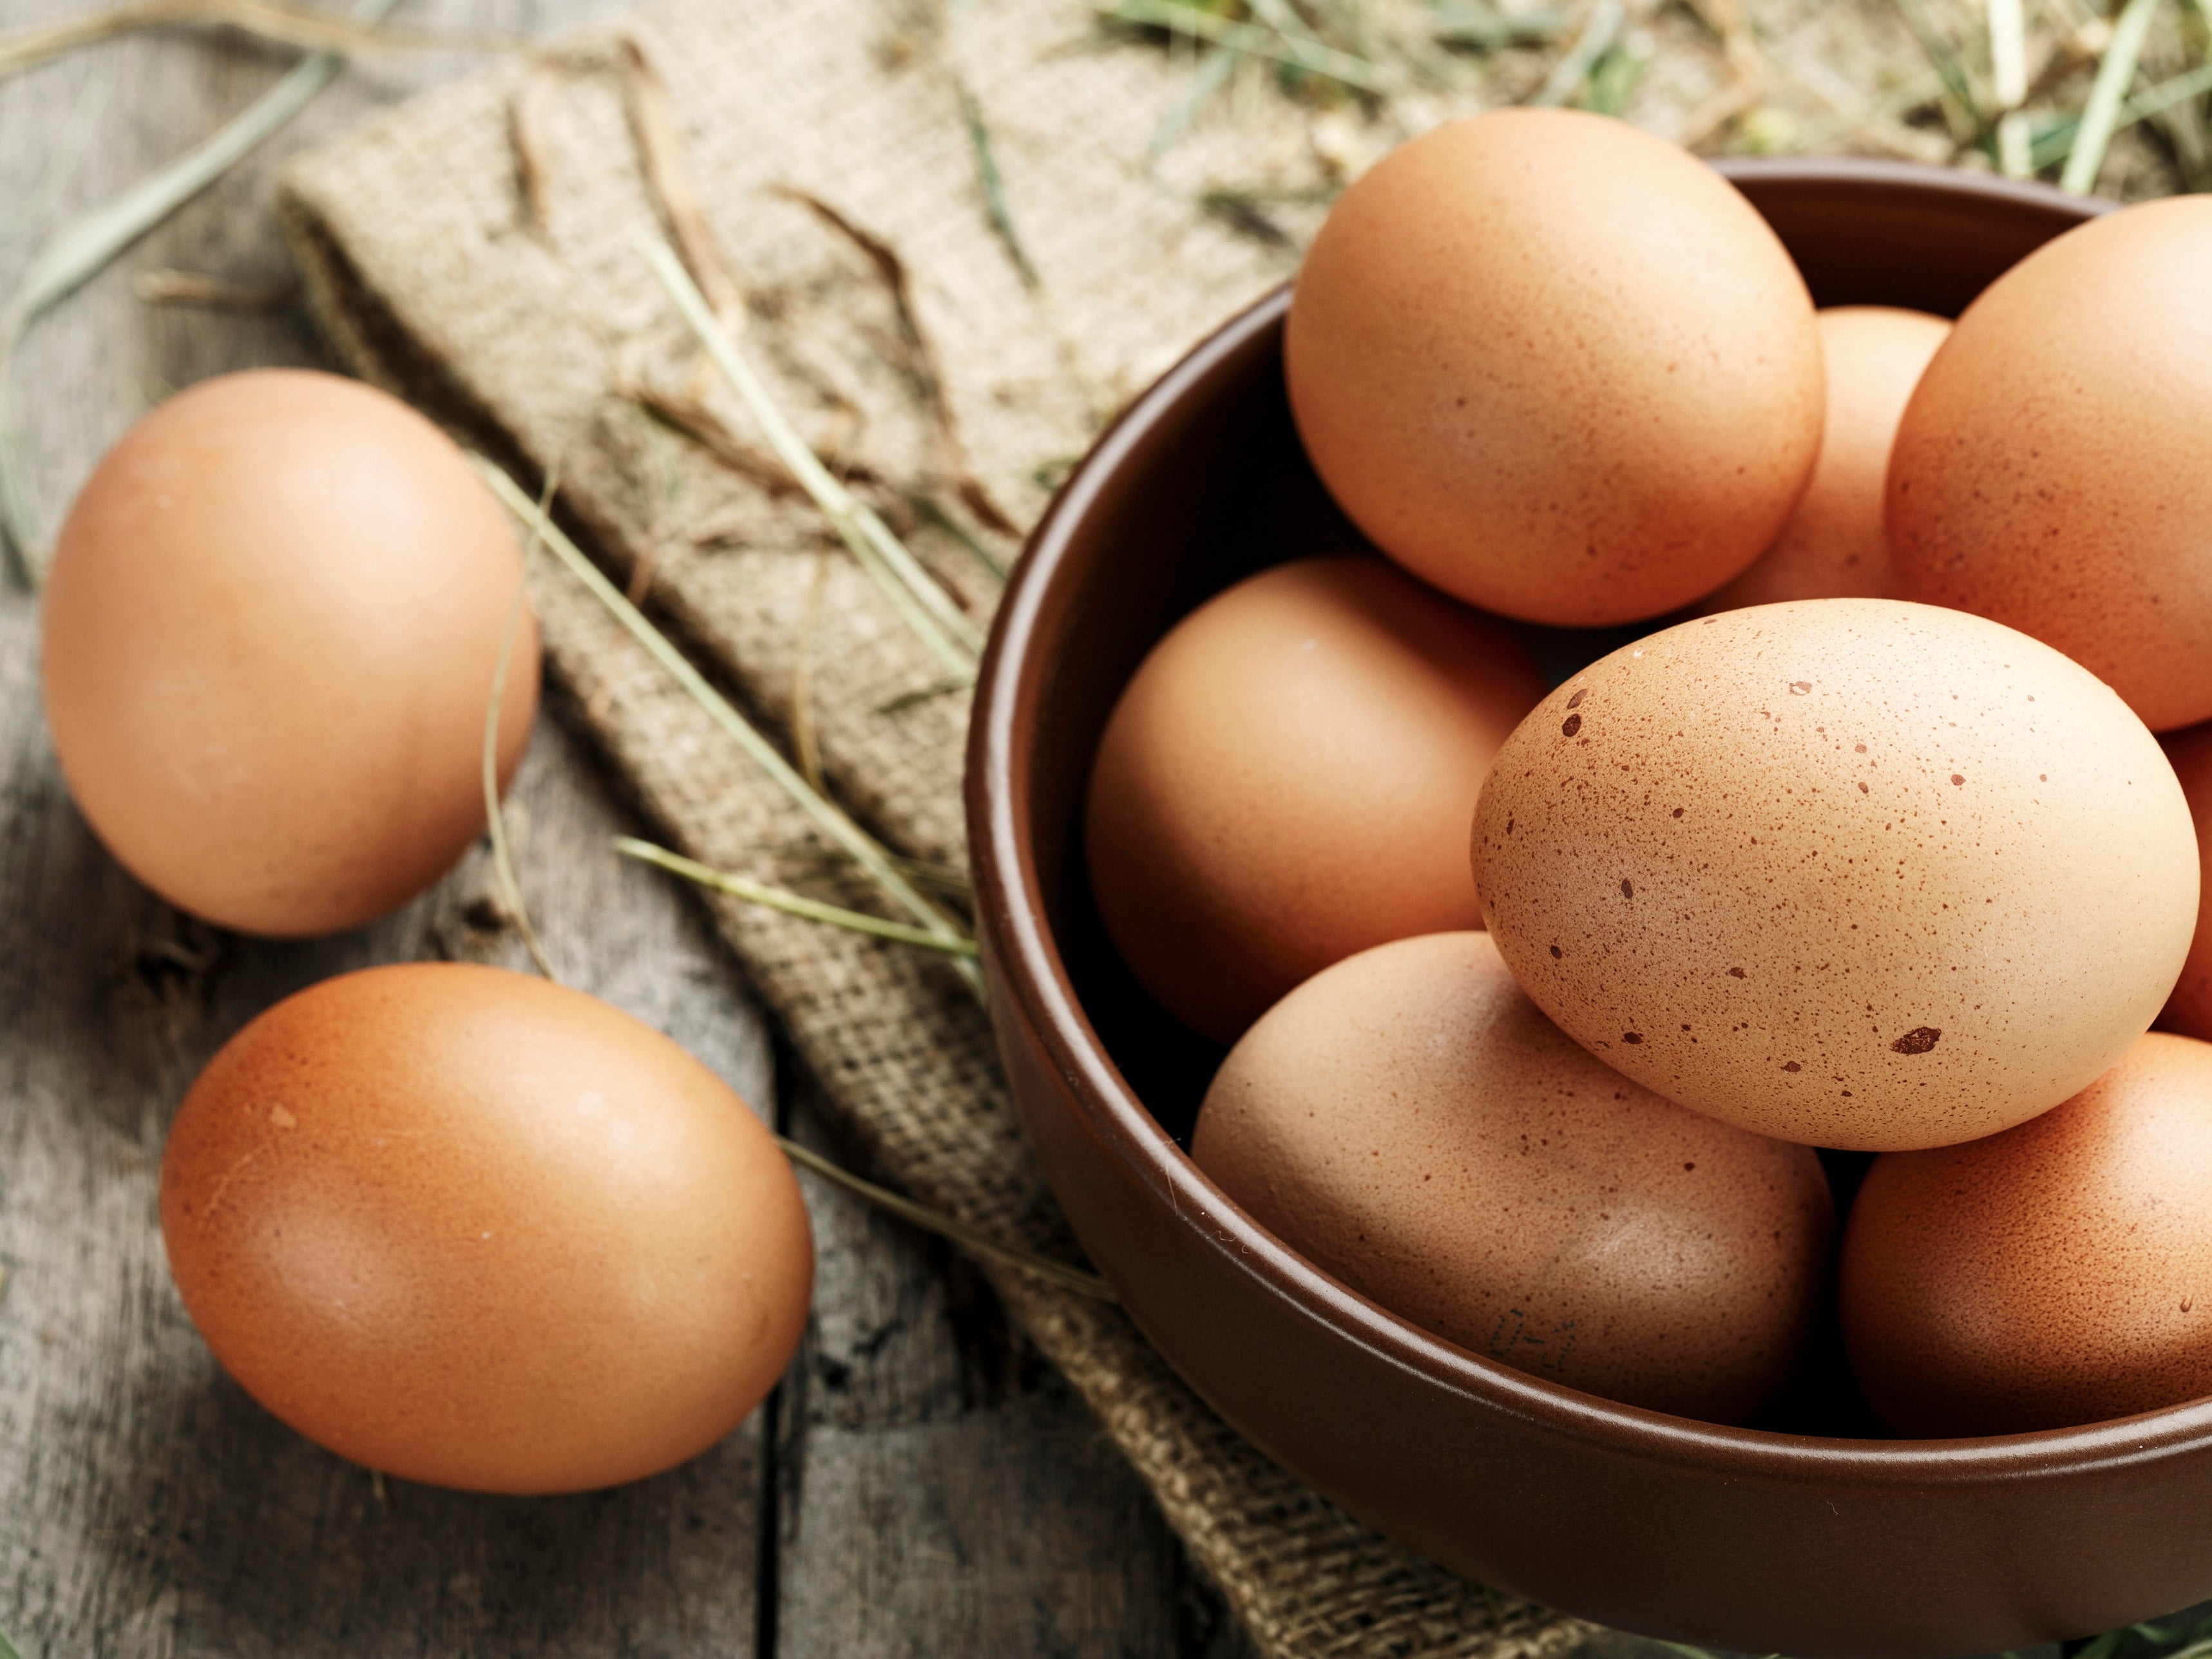 Free-range eggs come from hens which are able to roam freely around a farm yard